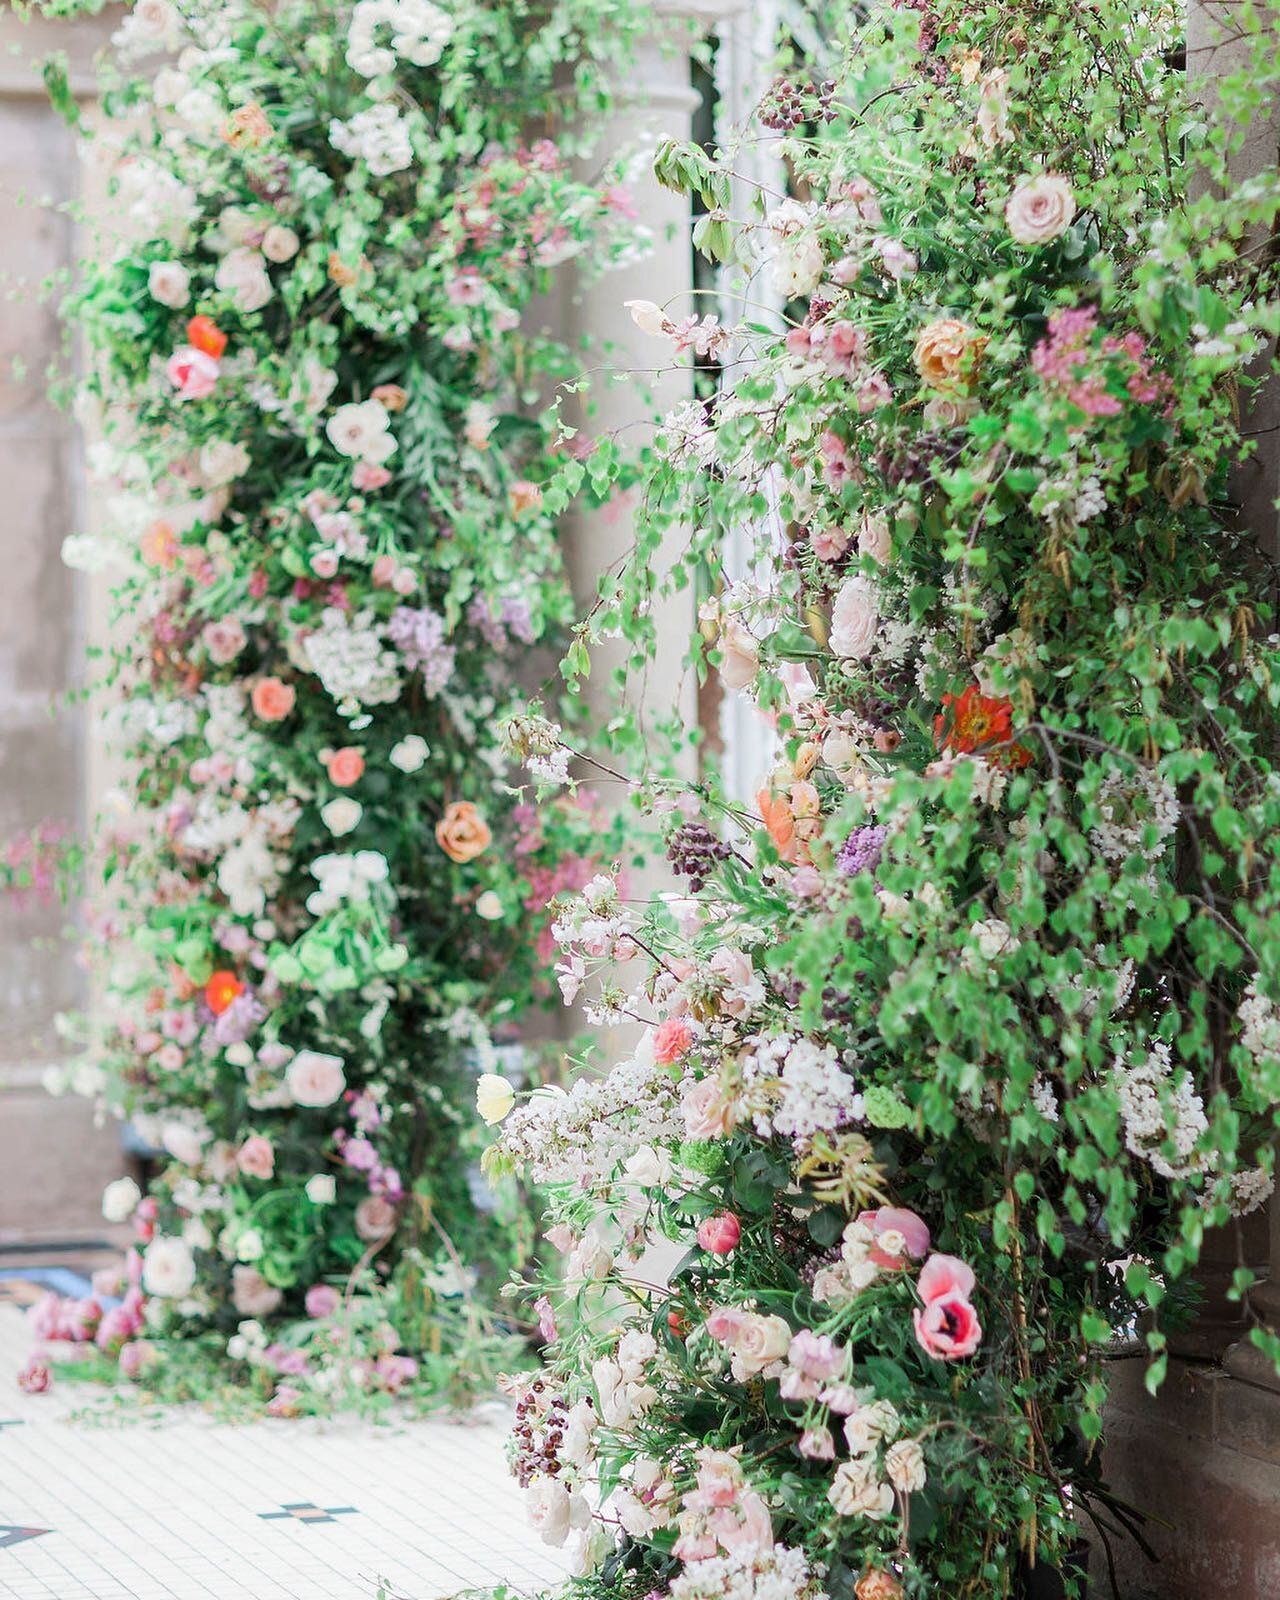 This is what happens when a group of super lovely florists get together. One glorious Spring arch.
Image @jobradburyphotography
Venue @sandonhall
.
.
.
#theflowerstory #fortheloveofflowers #britishflowers #britishflorals #britishweddingflowers #weddi